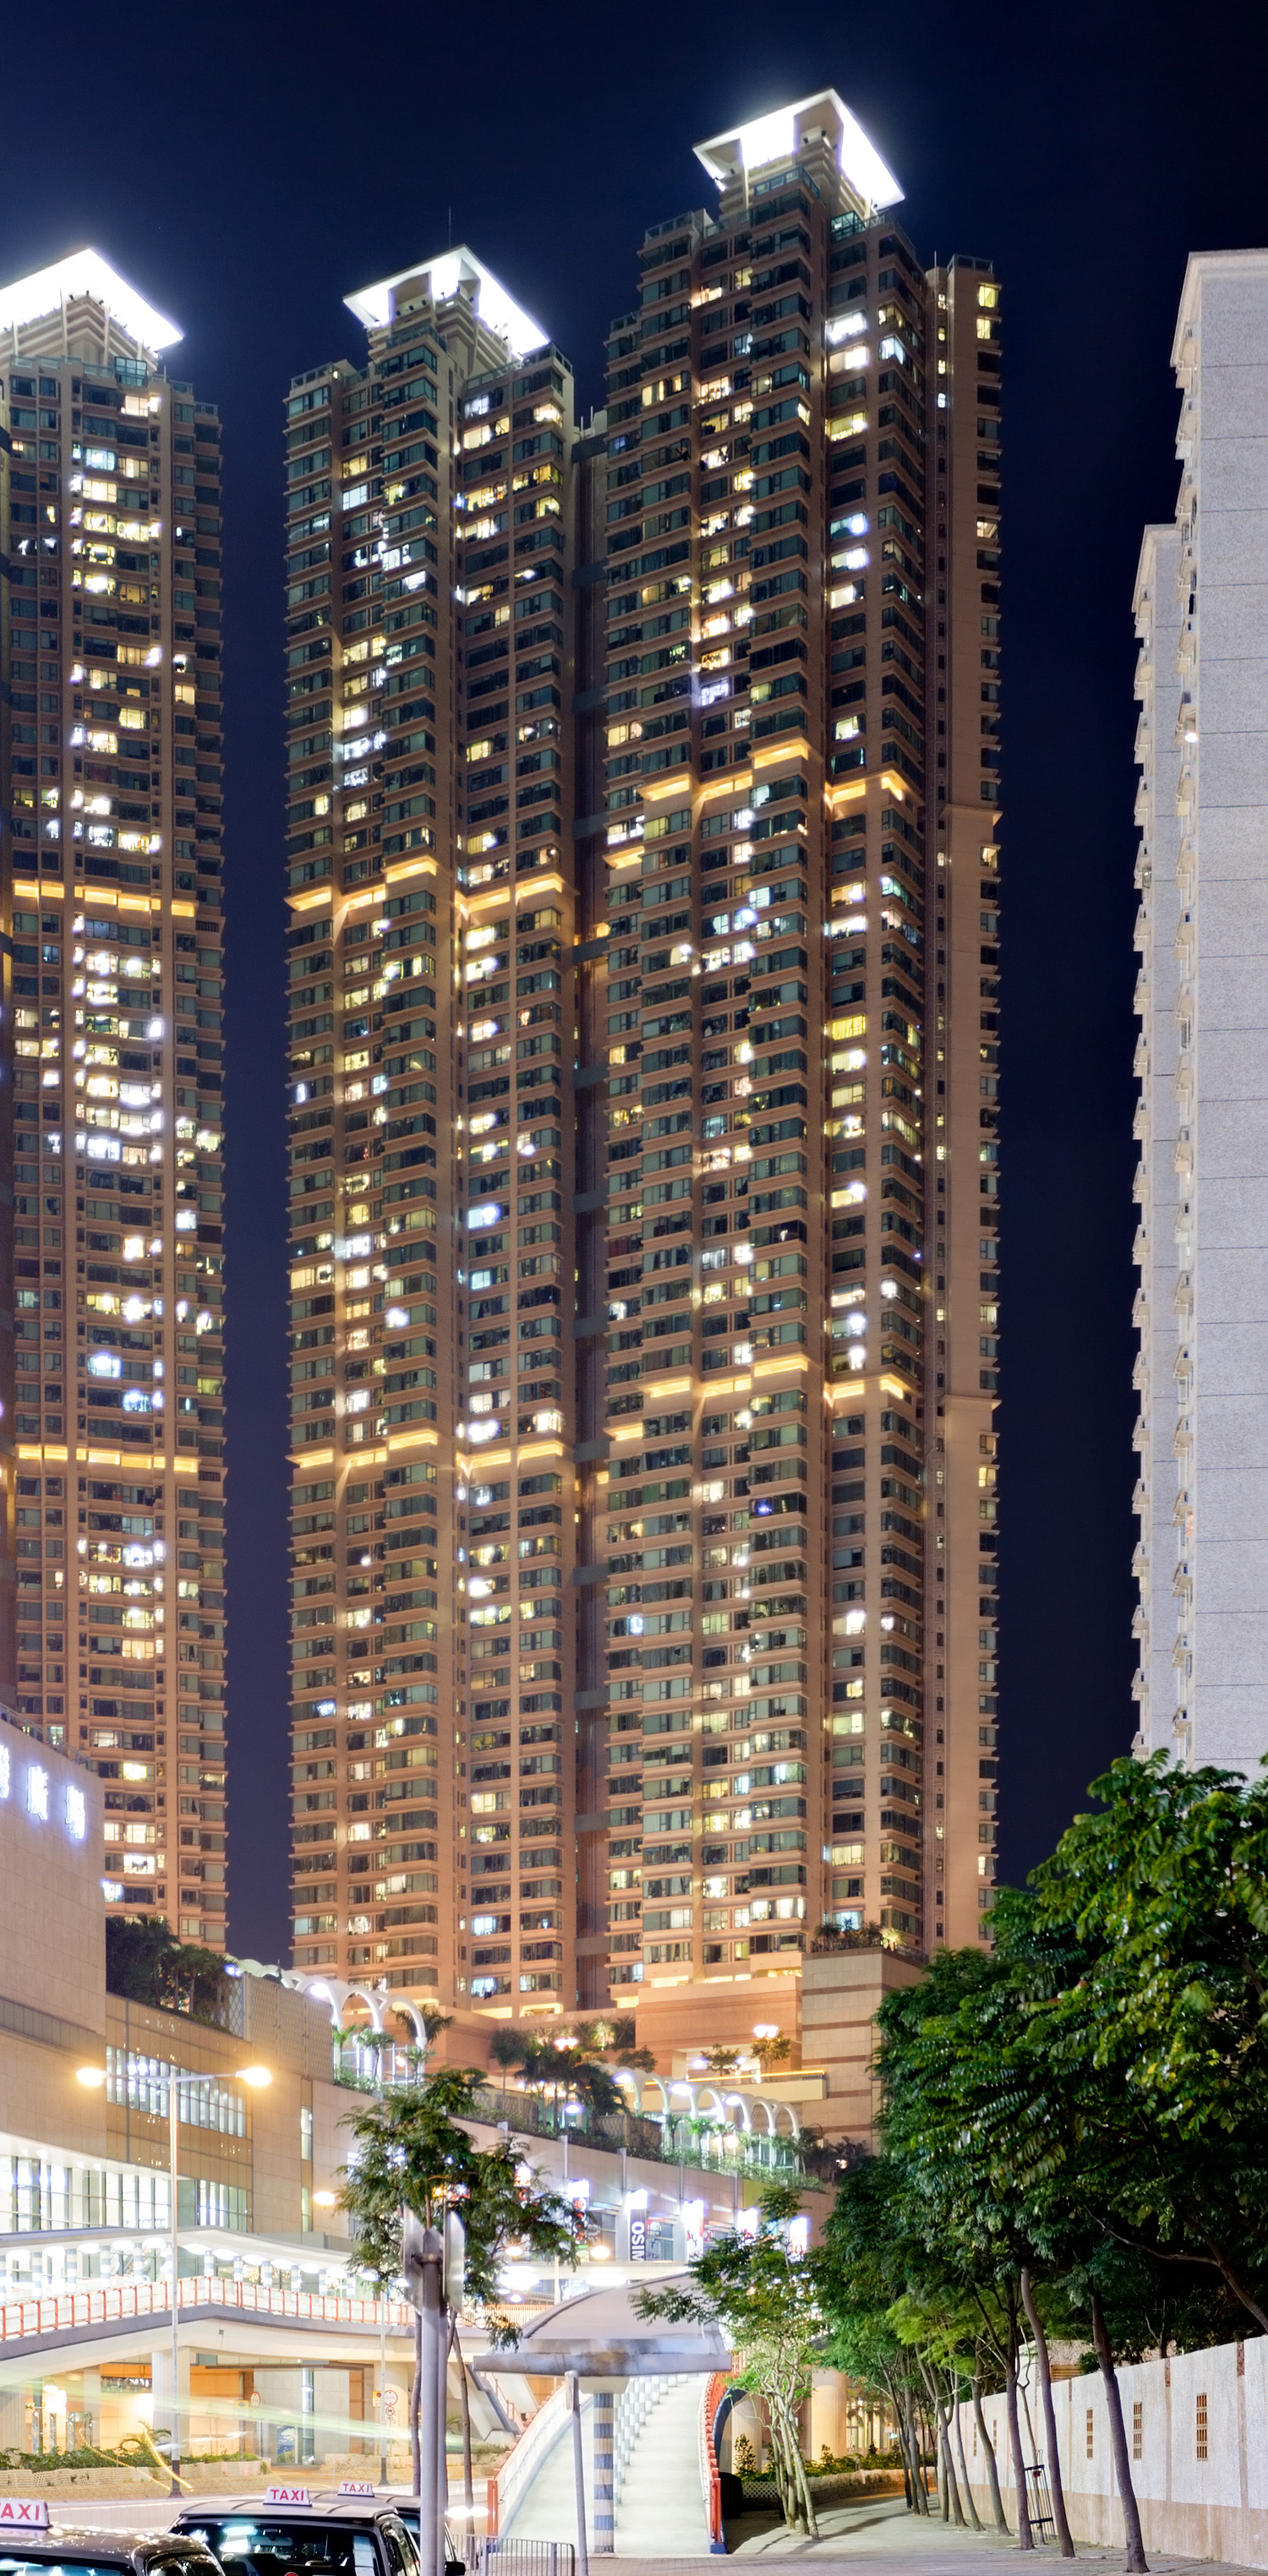 Island Resort Towers 3 & 5, Hong Kong - View from the west. © Mathias Beinling